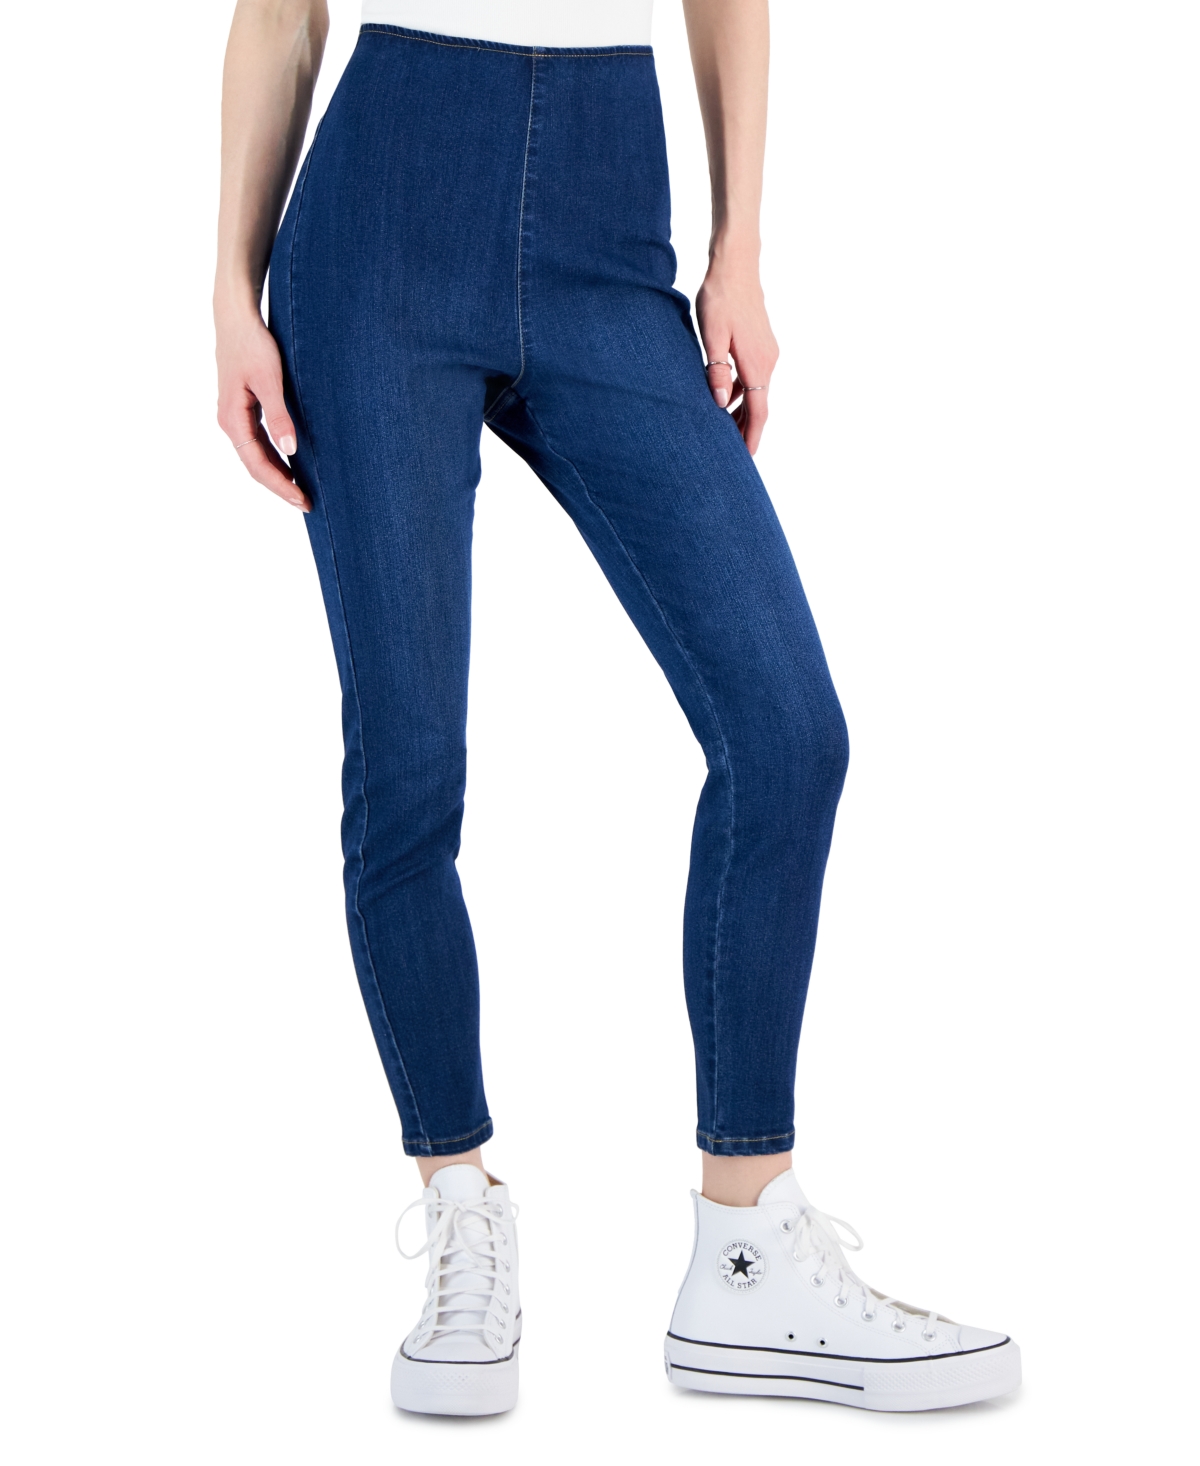 Juniors' High-Rise Pull-On Skinny Jeans - Francine Wash